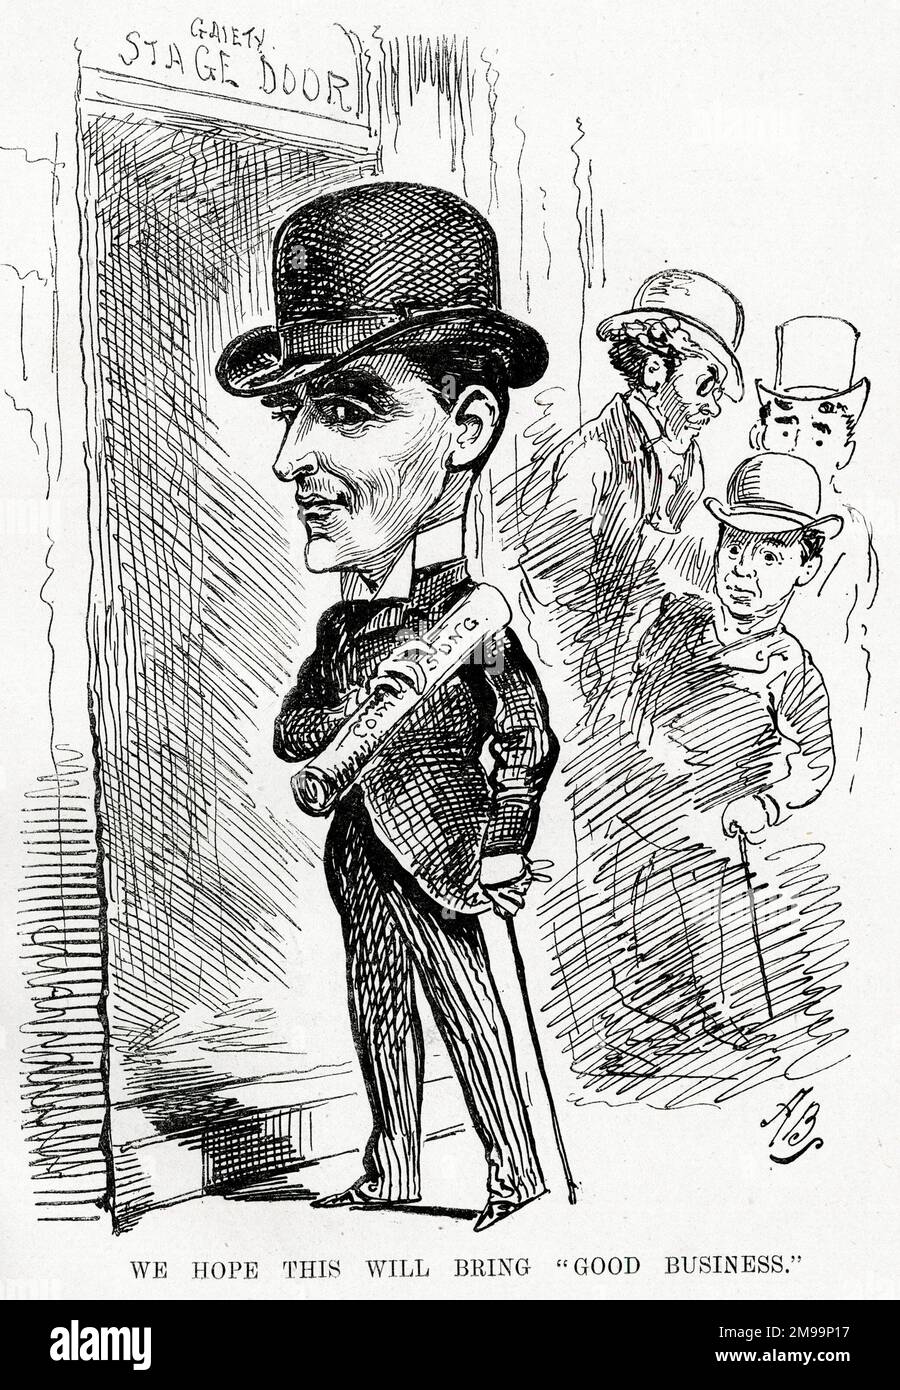 Cartoon, outside the Stage Door of the Gaiety Theatre, London - We hope this will bring good business. The man in the foreground is J L Shine, director of the theatre. Stock Photo